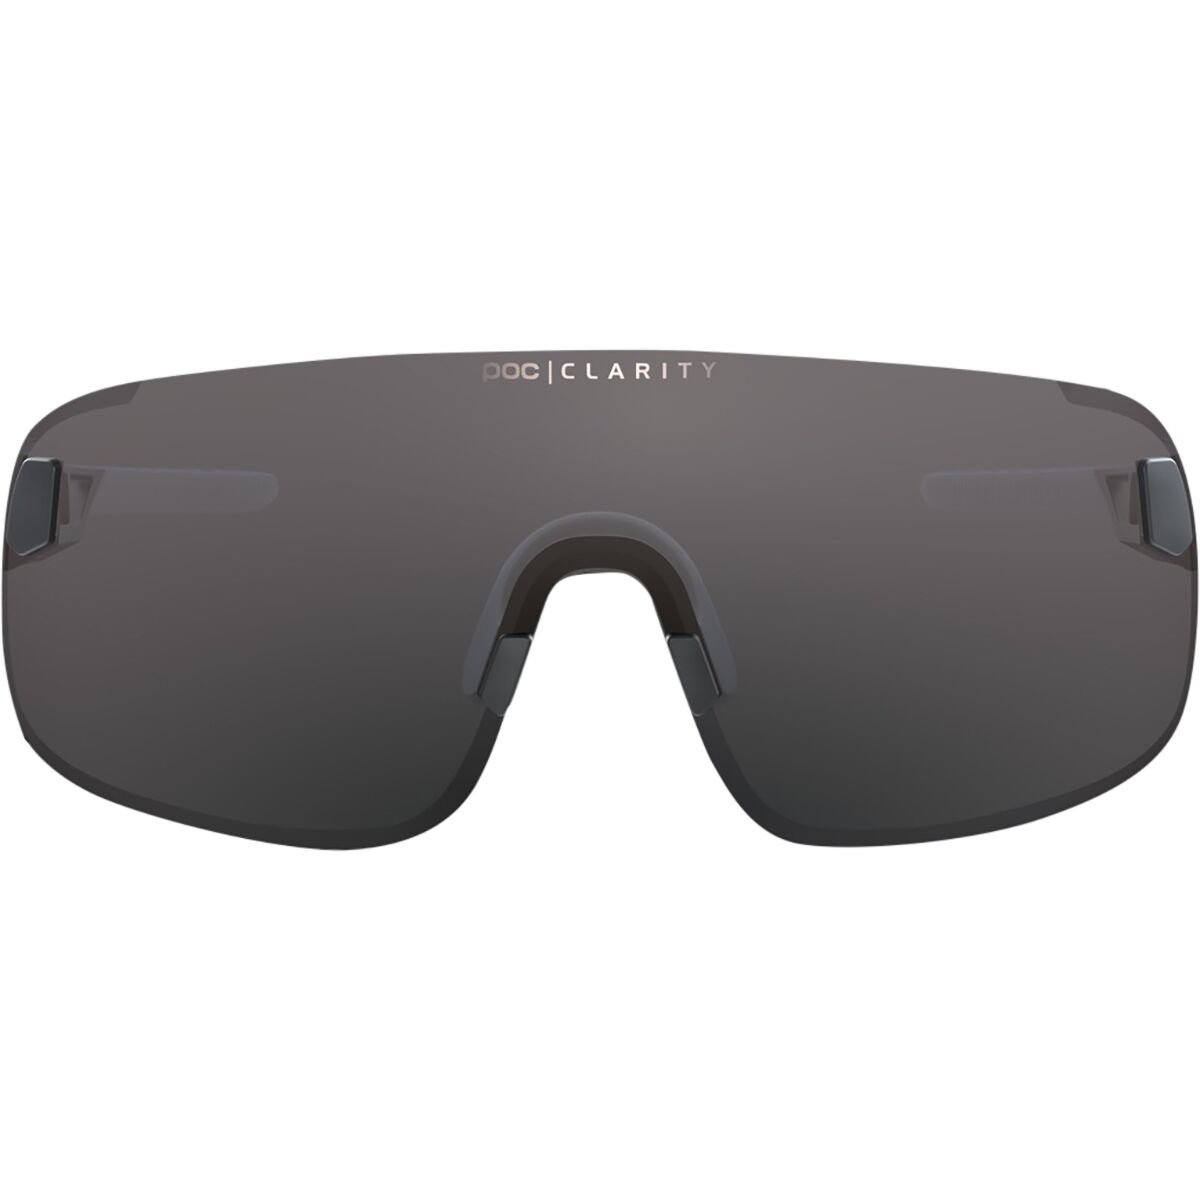 Outdoor Eyewear POC ELICIT Cycling Sunglasses Sport Road Mountain